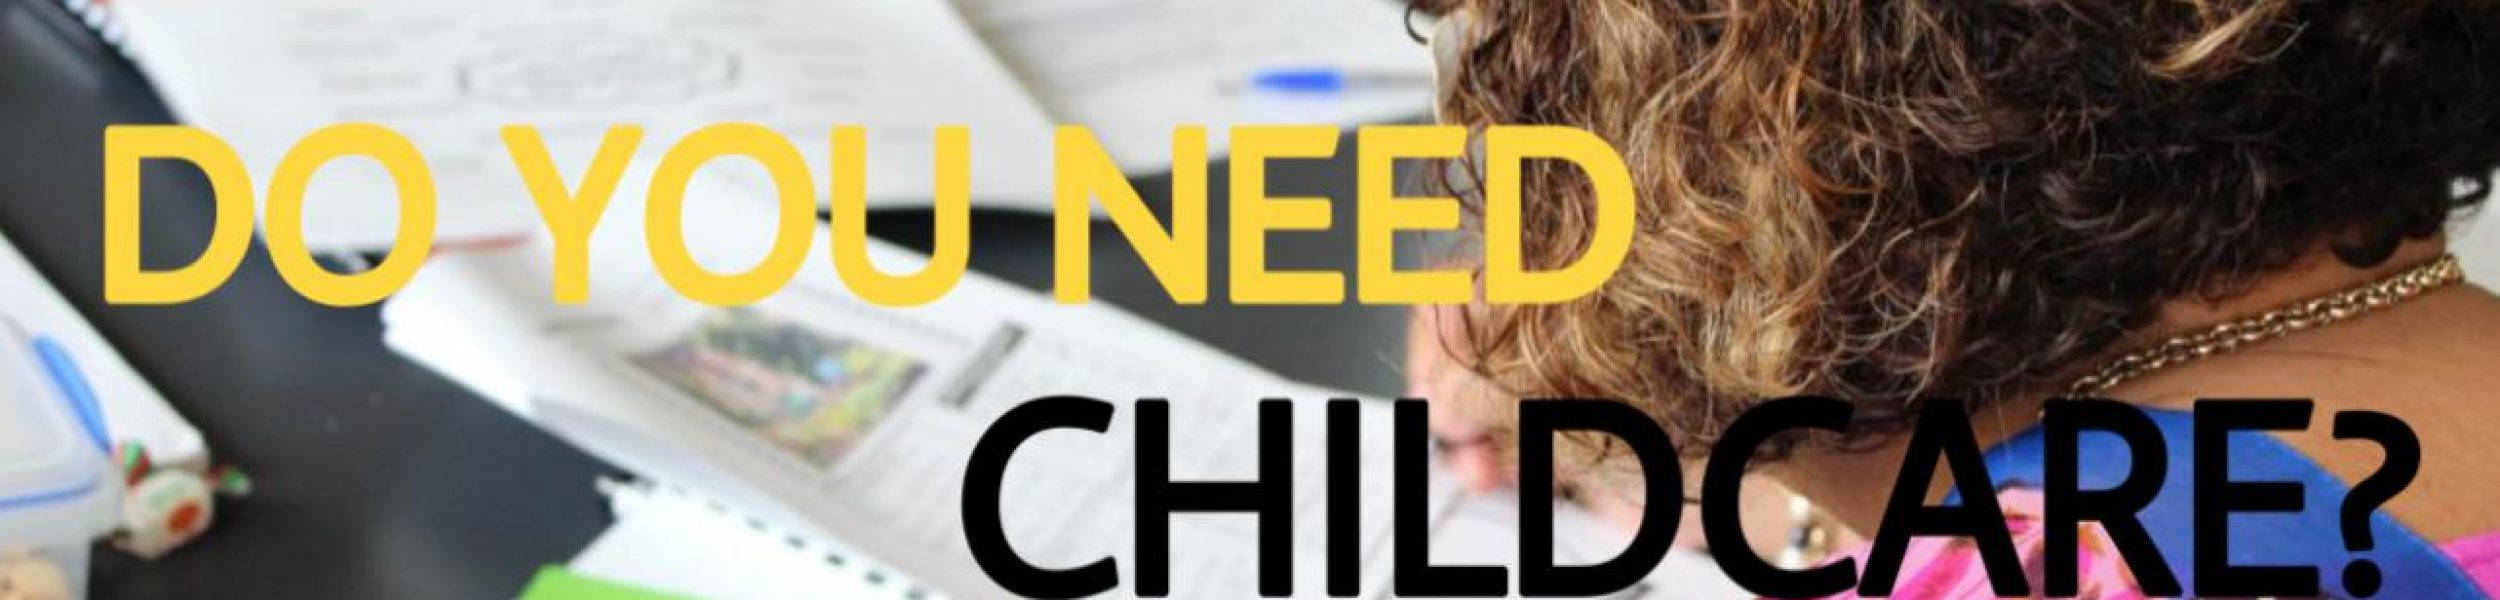 Do-you-need-Childcare